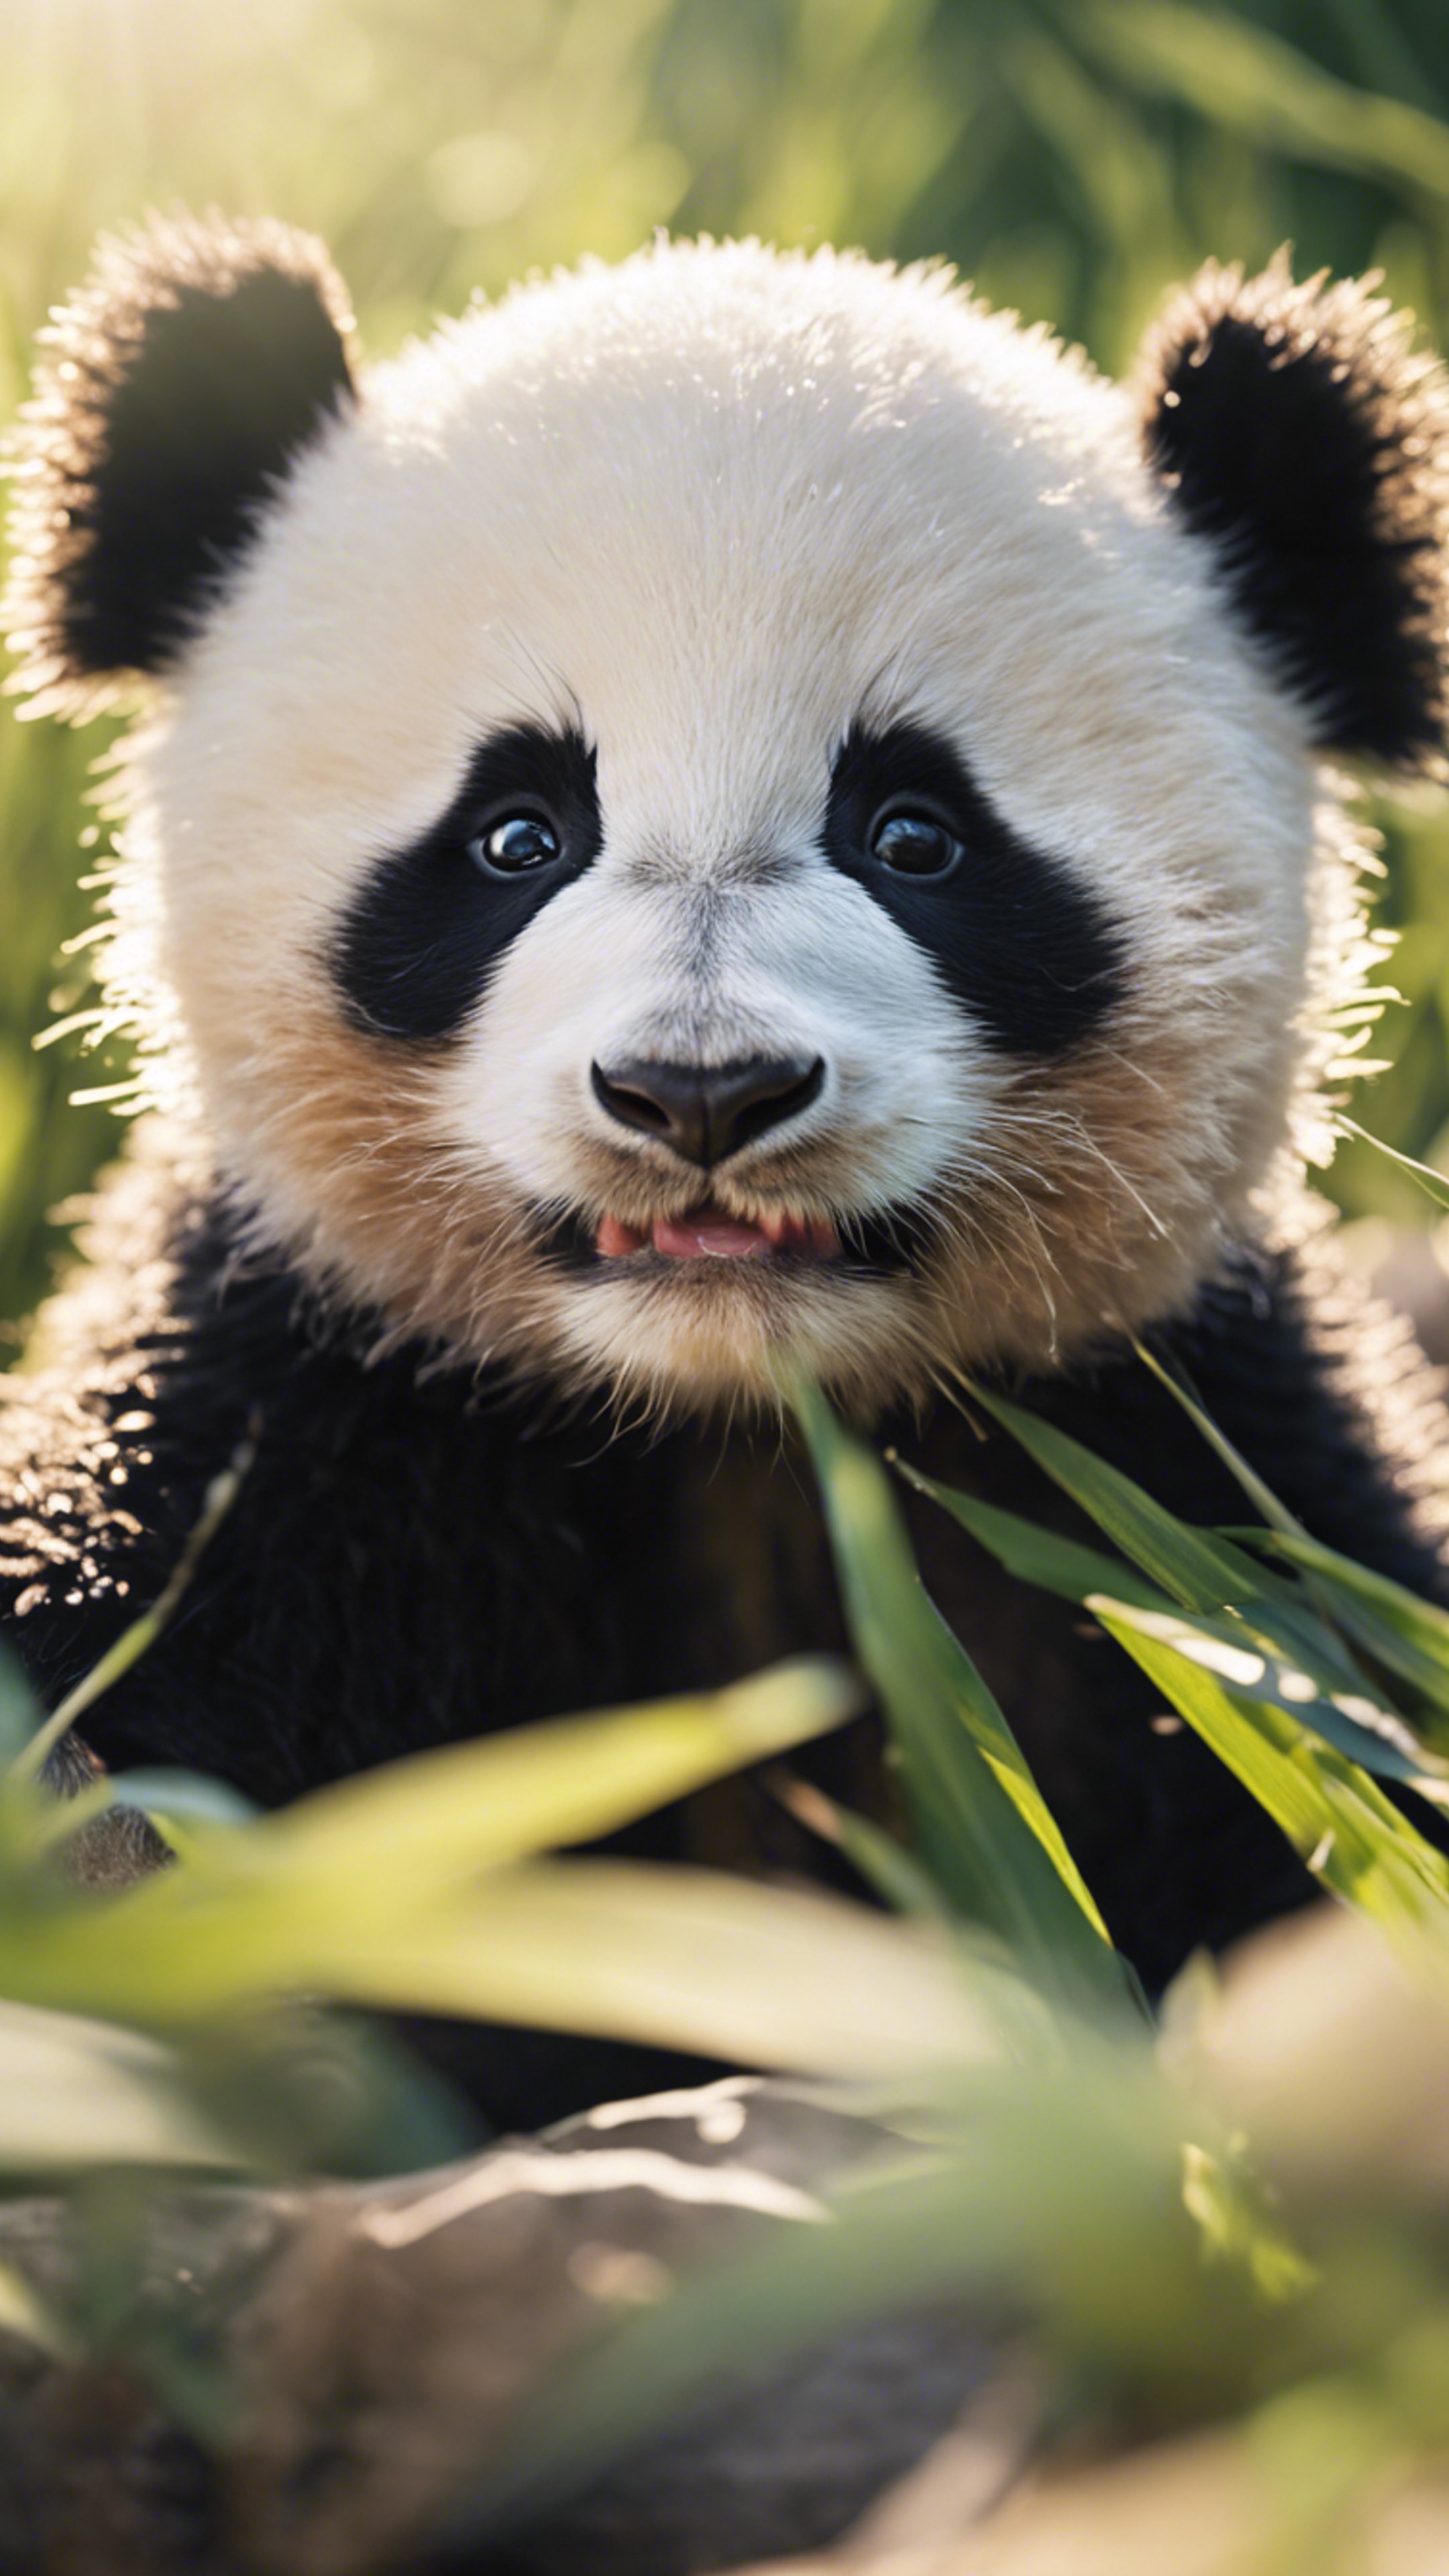 A cheeky panda cub pulling a funny face, under the warm and inviting summer sun. Валлпапер[260c49d866ff4dc685e3]